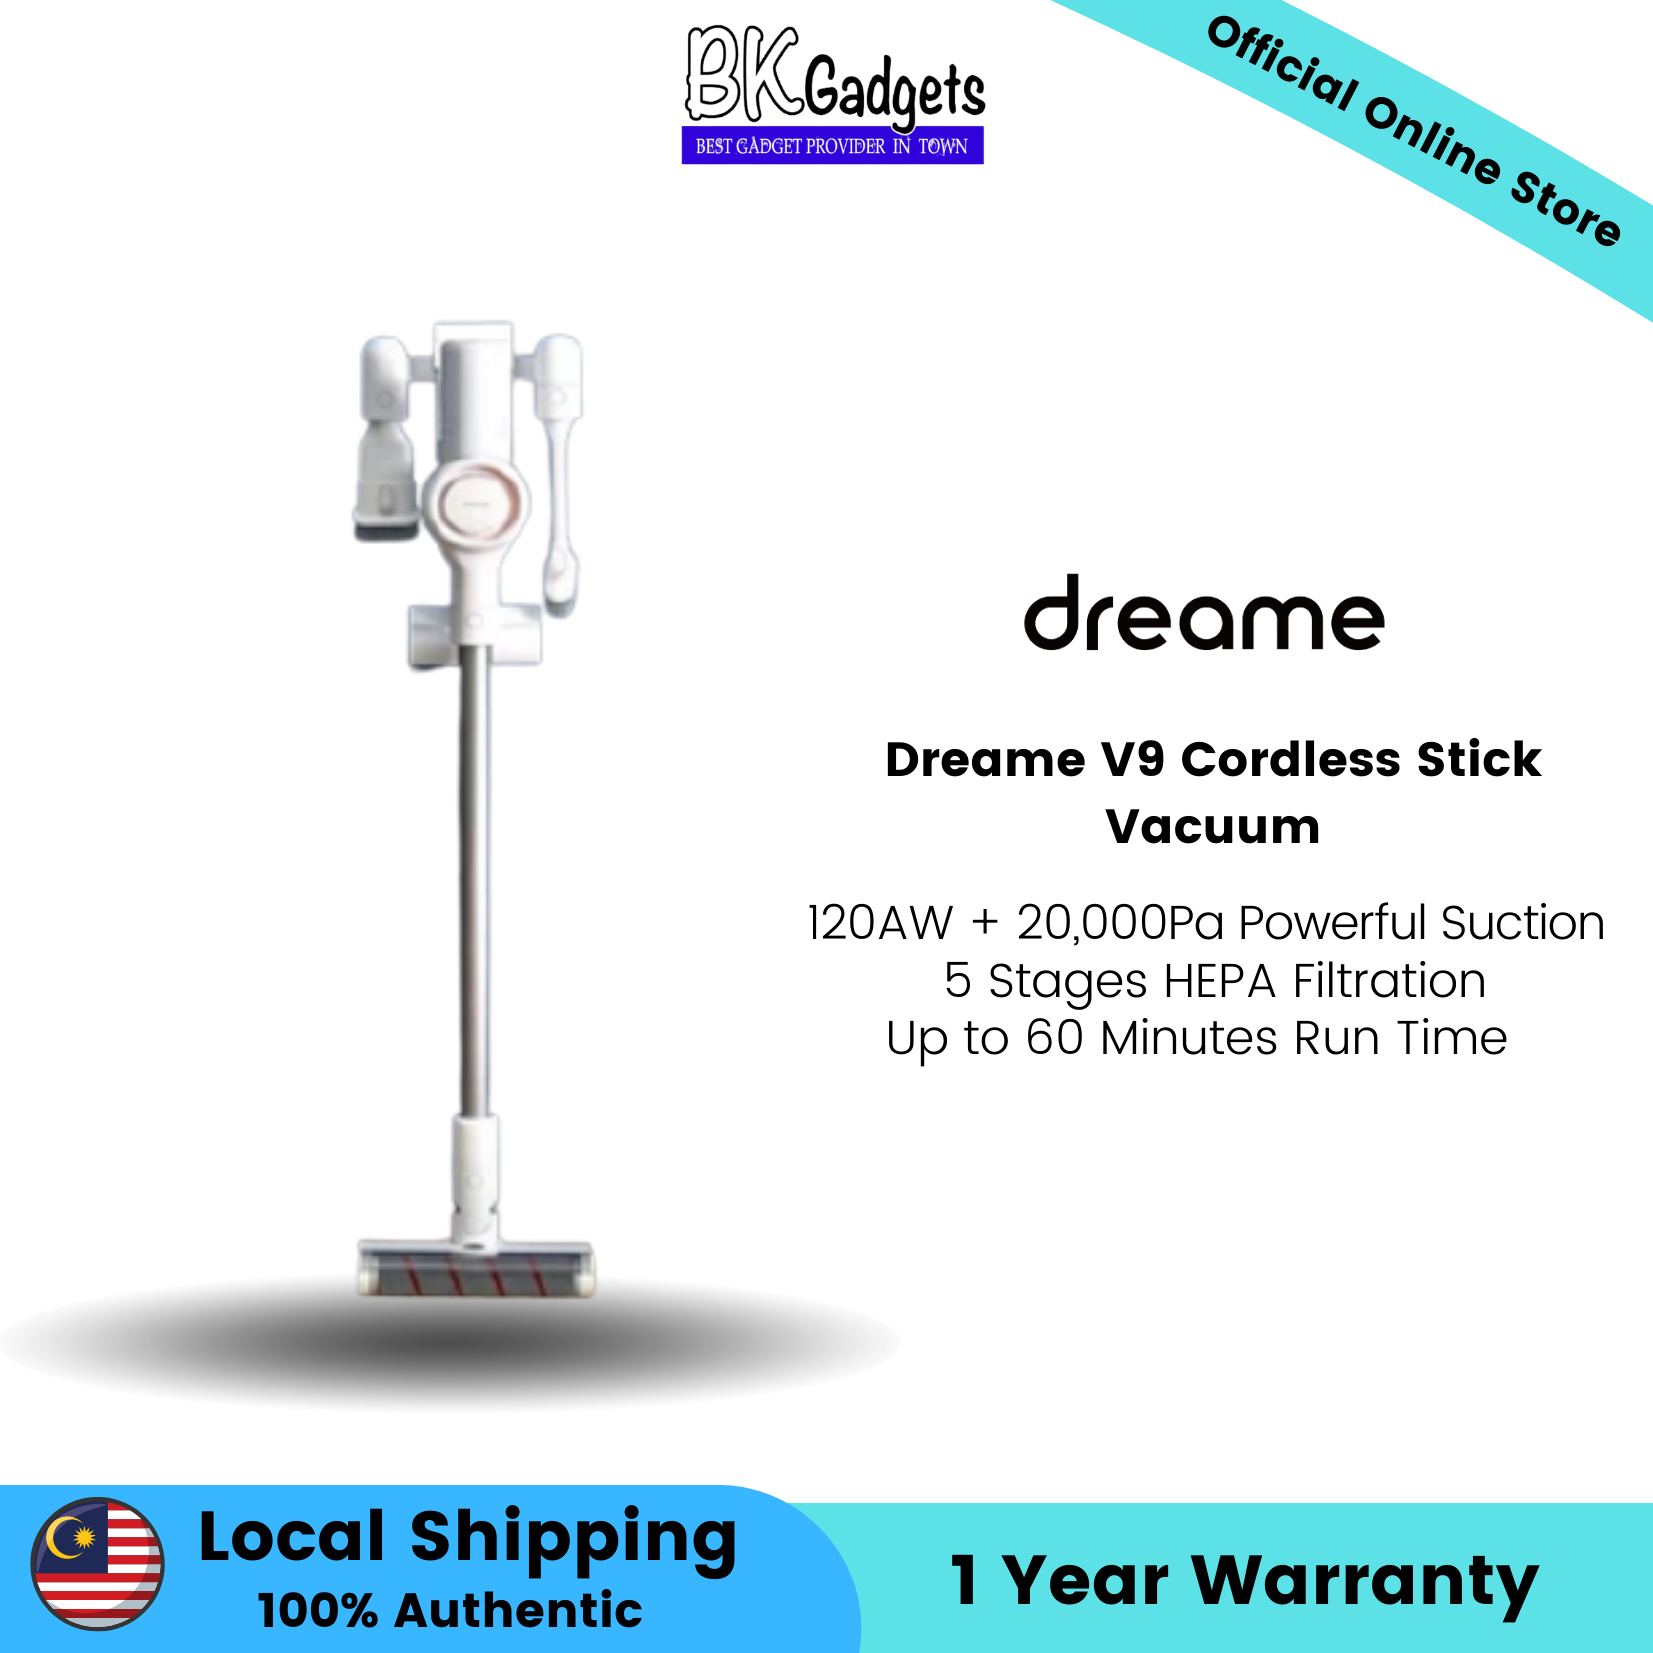 Dreame V9 Cordless Stick Vacuum |120AW + 20,000Pa Powerful Suction | 5 Stages HEPA Filtration |Up to 60 Minutes Run Time